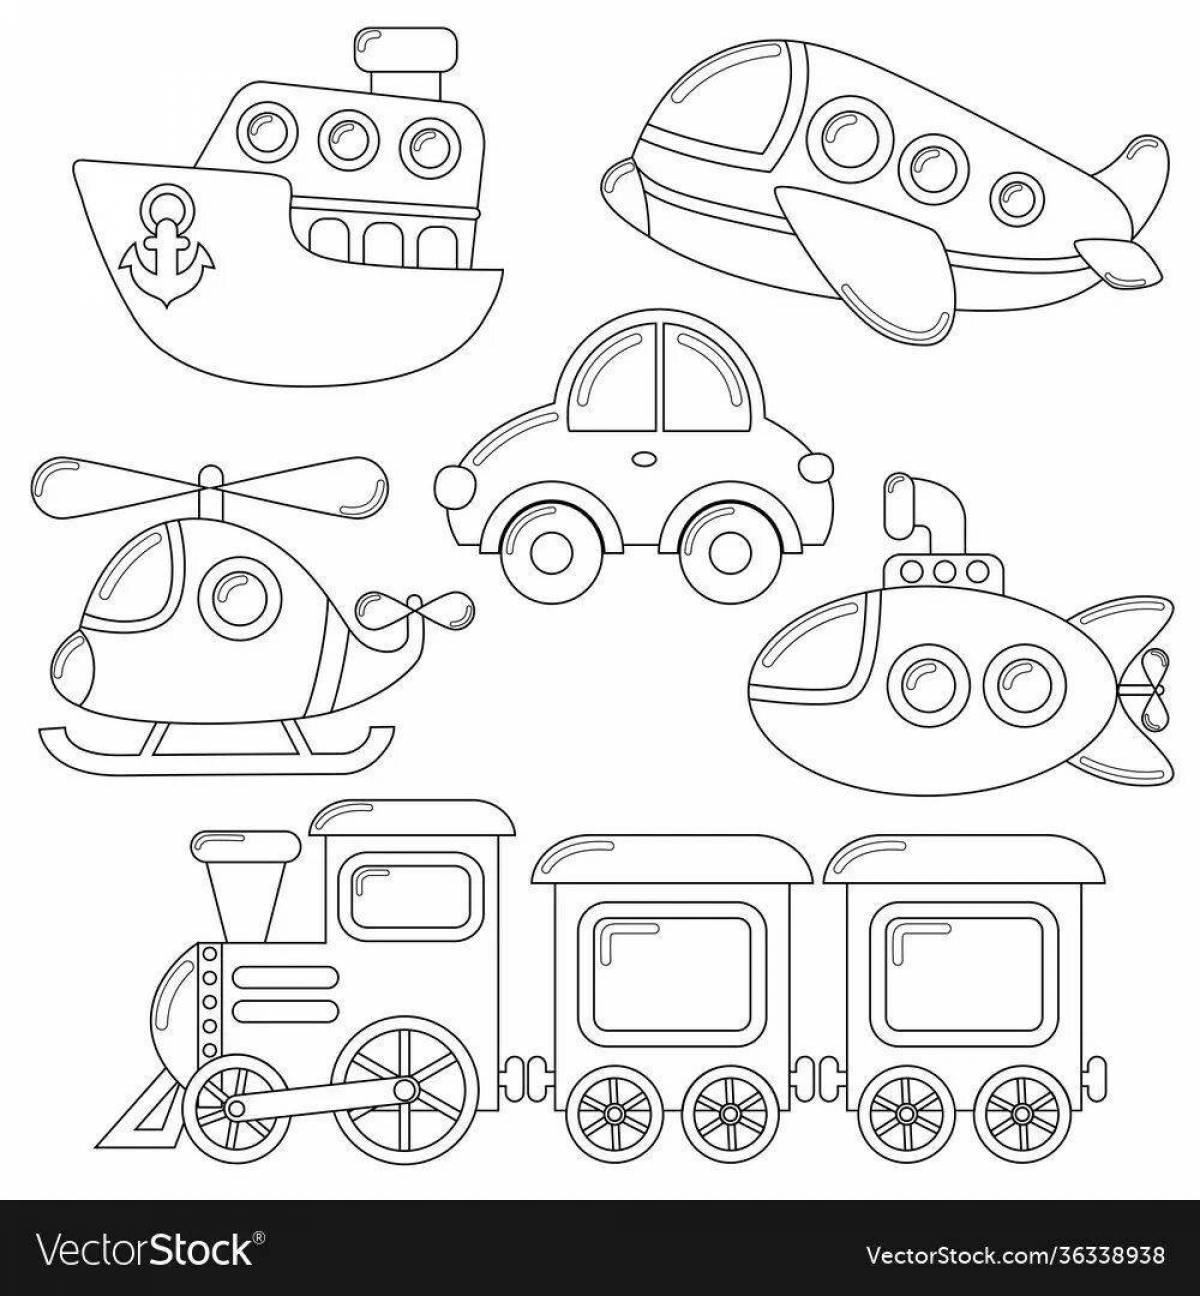 Coloring page funny land transport